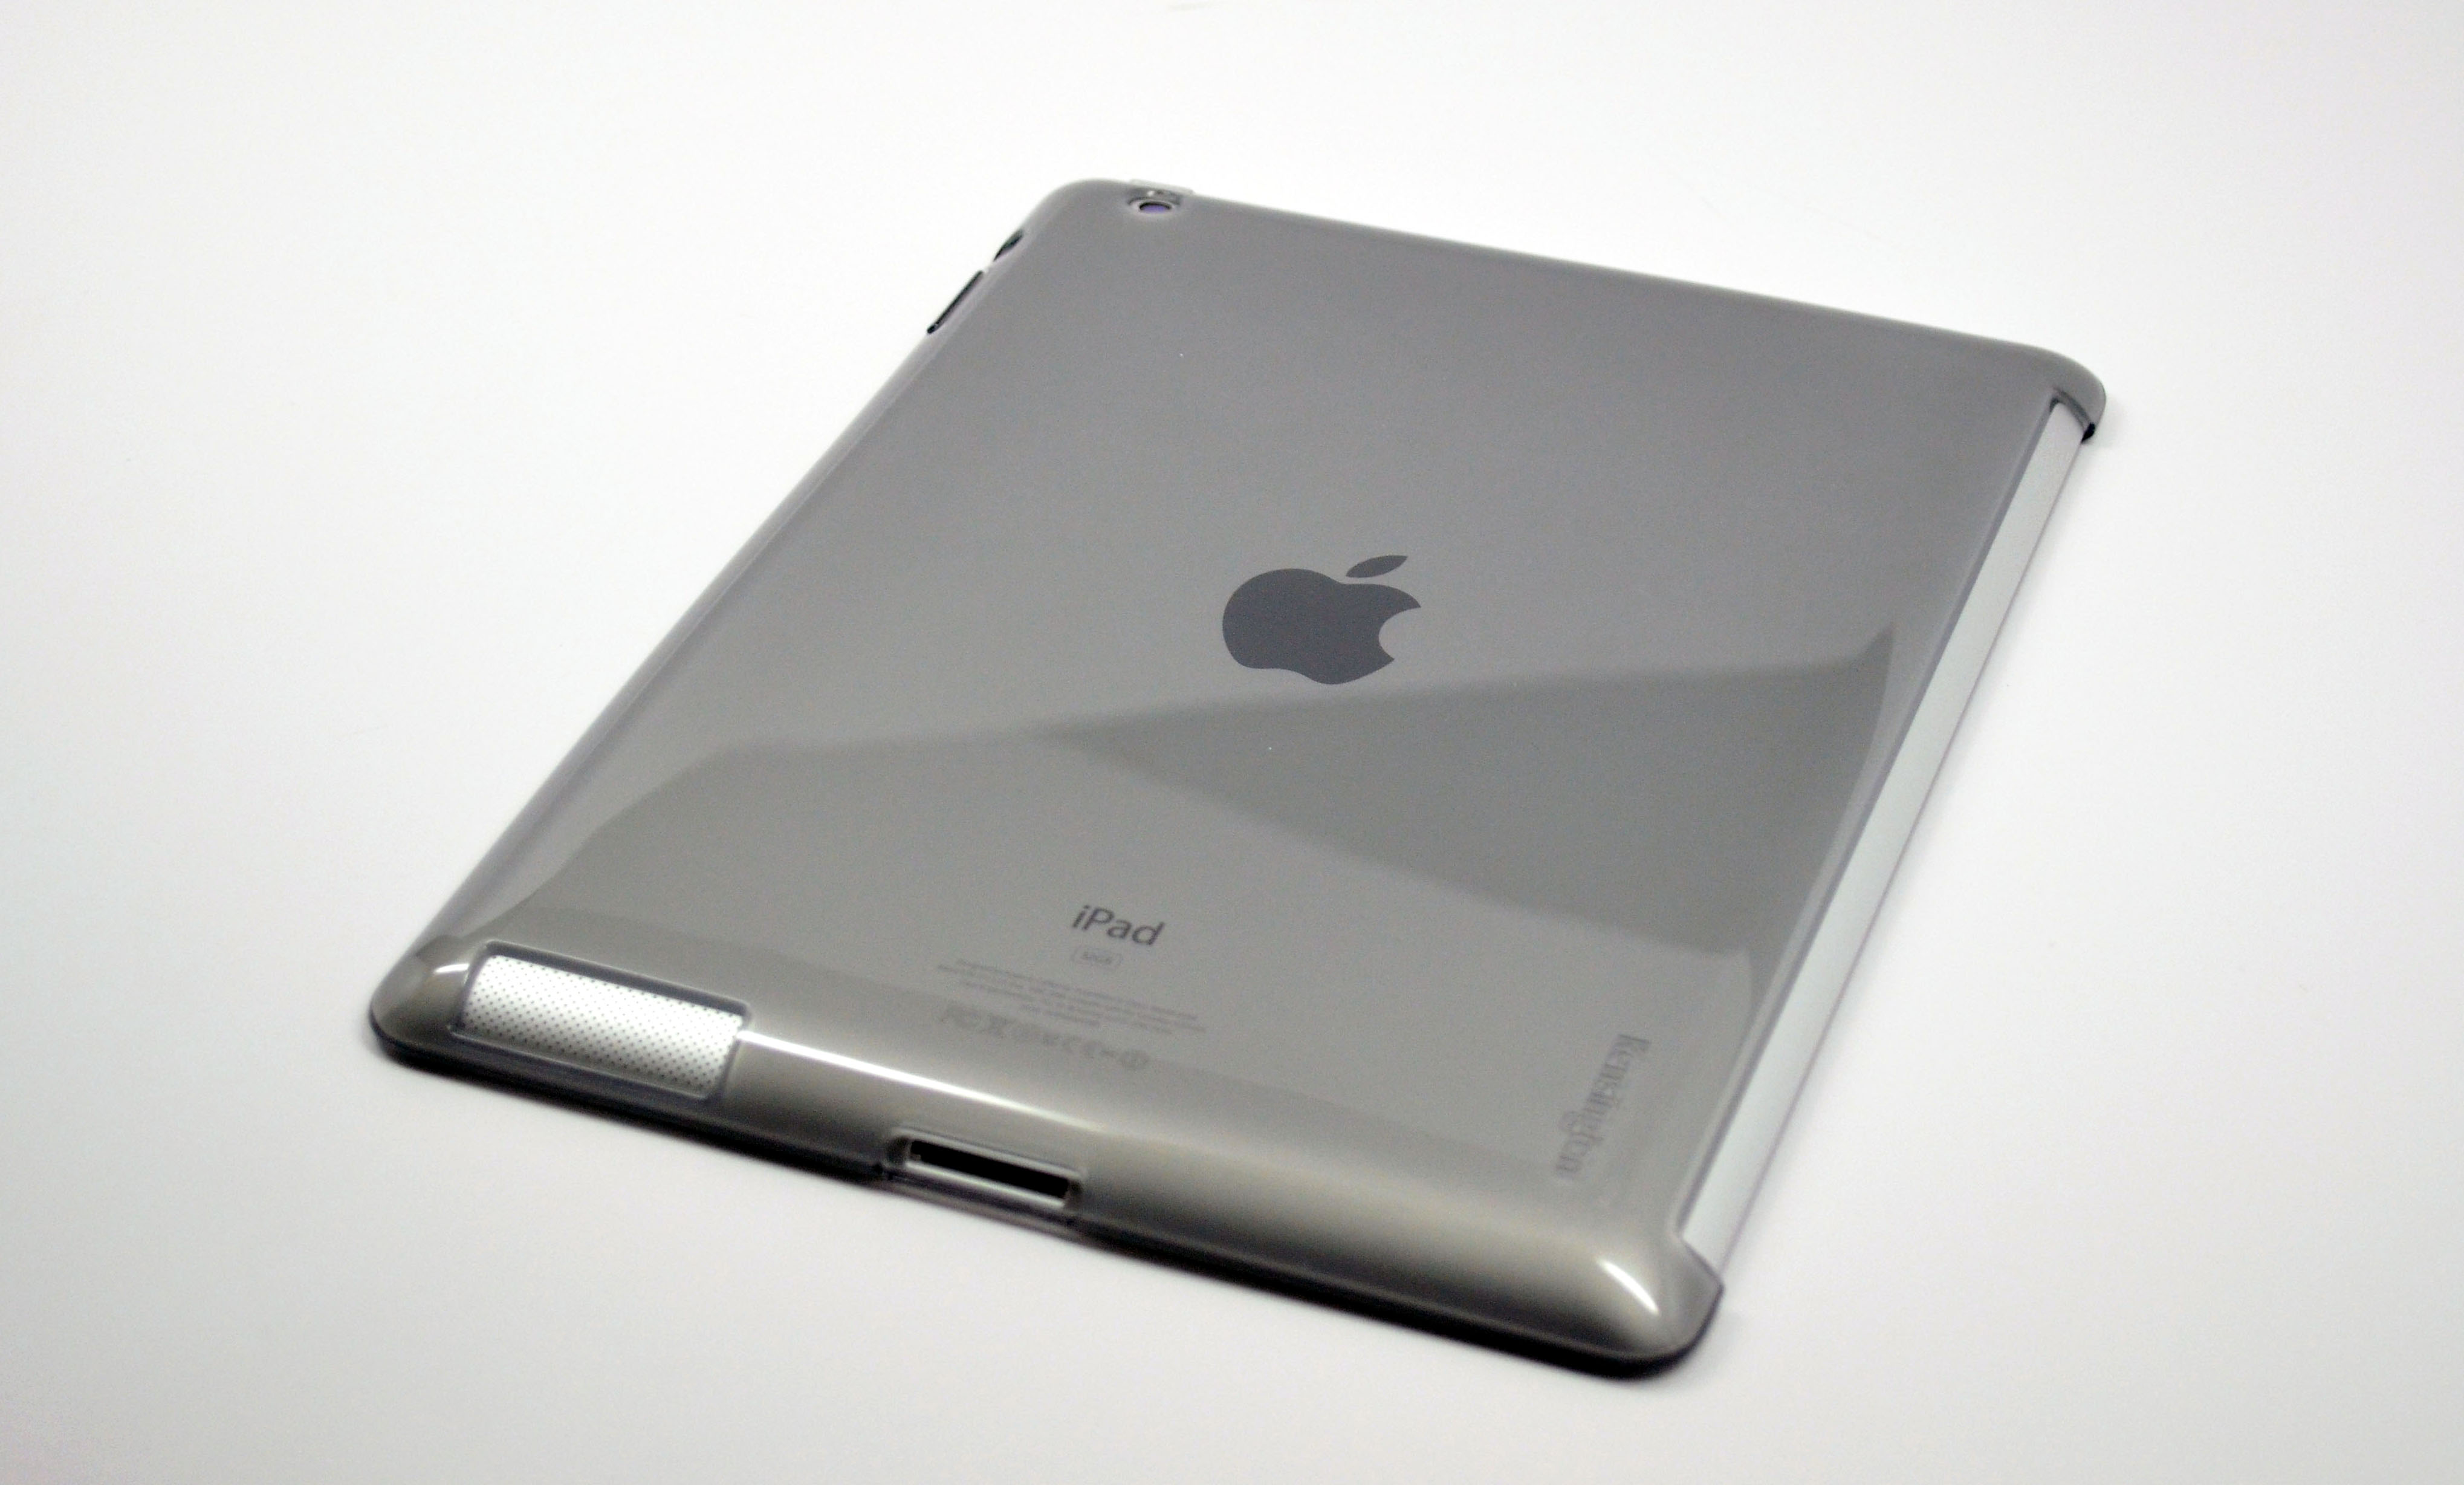 Here's a look at user iOS 8.1 iPad 2 reviews.